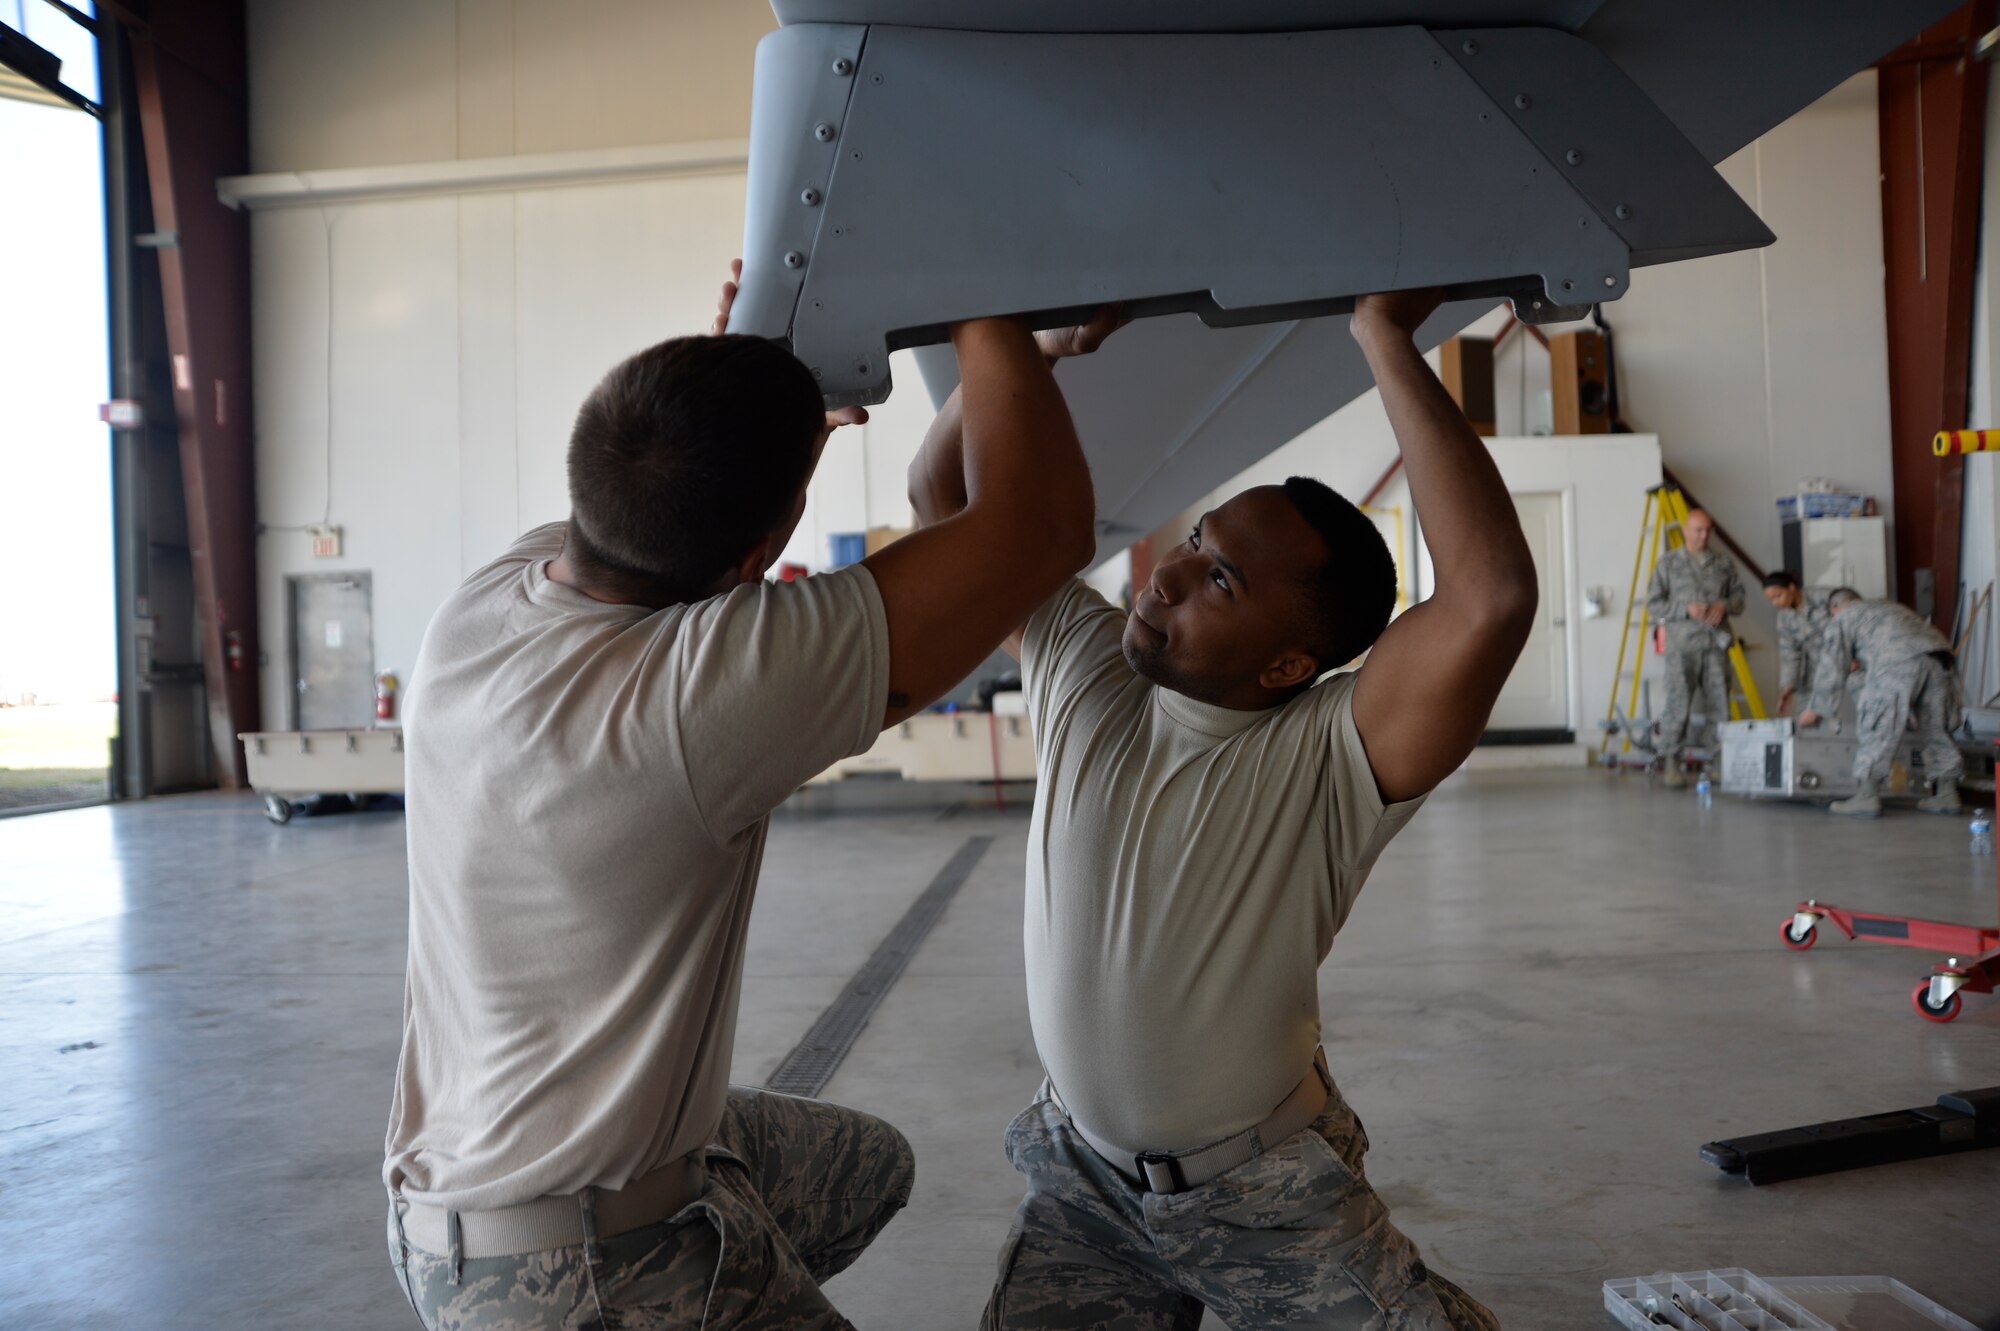 Senior Airman Nicholas Villa, 432nd Aircraft Maintenance Squadron weapons load crew member, left, and Senior Airman Shamai Bell, 432nd AMXS avionics technican assemble the weapons pylon of an MQ-1 Predator July 25, 2015, in Lethbridge, Alberta province, Canada. The MQ-1 Predator participated in the 2015 Lethbridge International Airshow as a static display where spectators could ask the maintenance, intelligence, sensor operators, and pilots questions about the aircraft. (U.S. Air Force photo by Airman 1st Class Christian Clausen/Released)